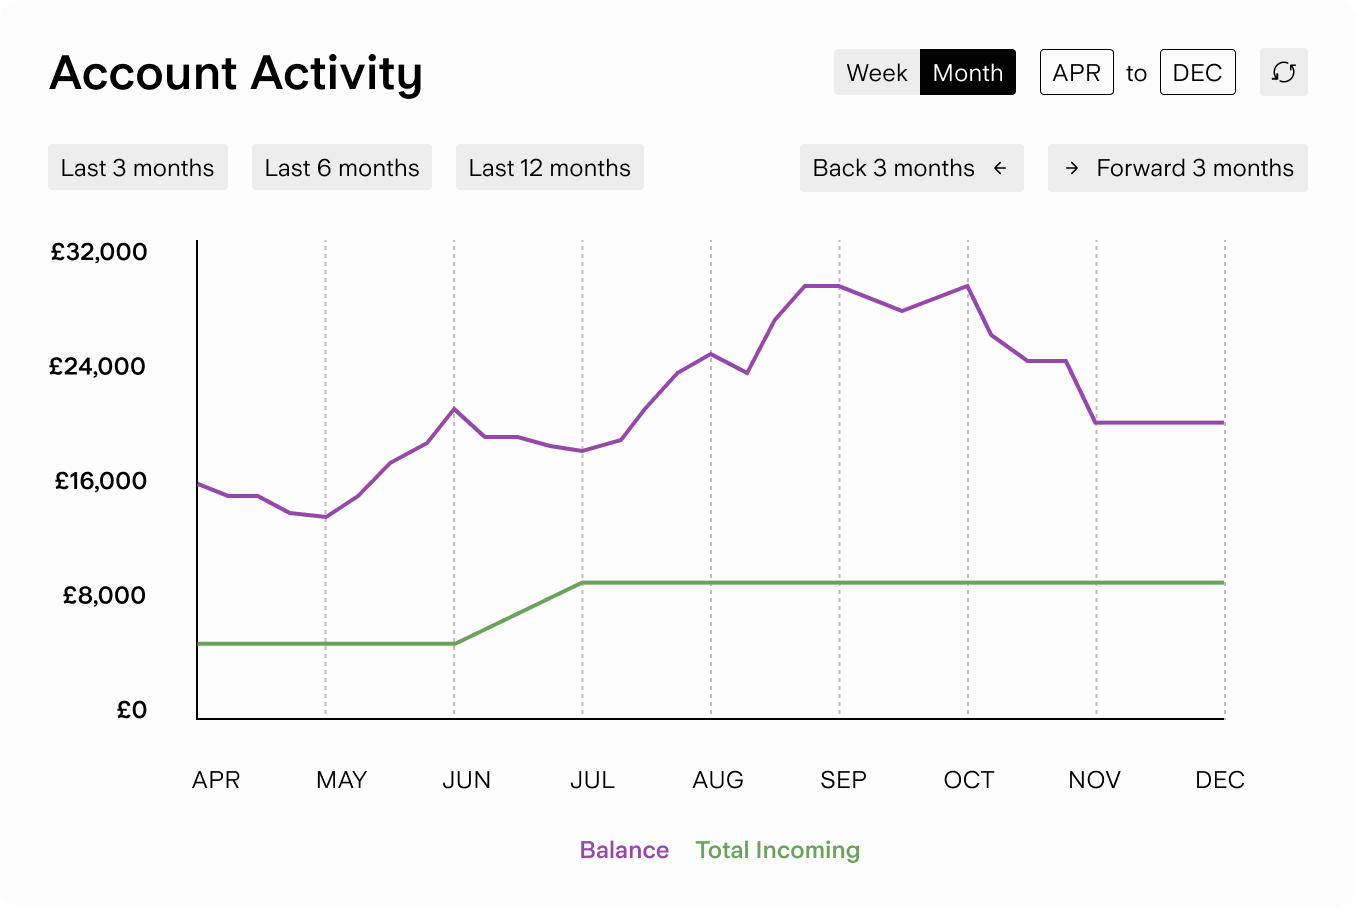 Graph showing account activity over a period of time